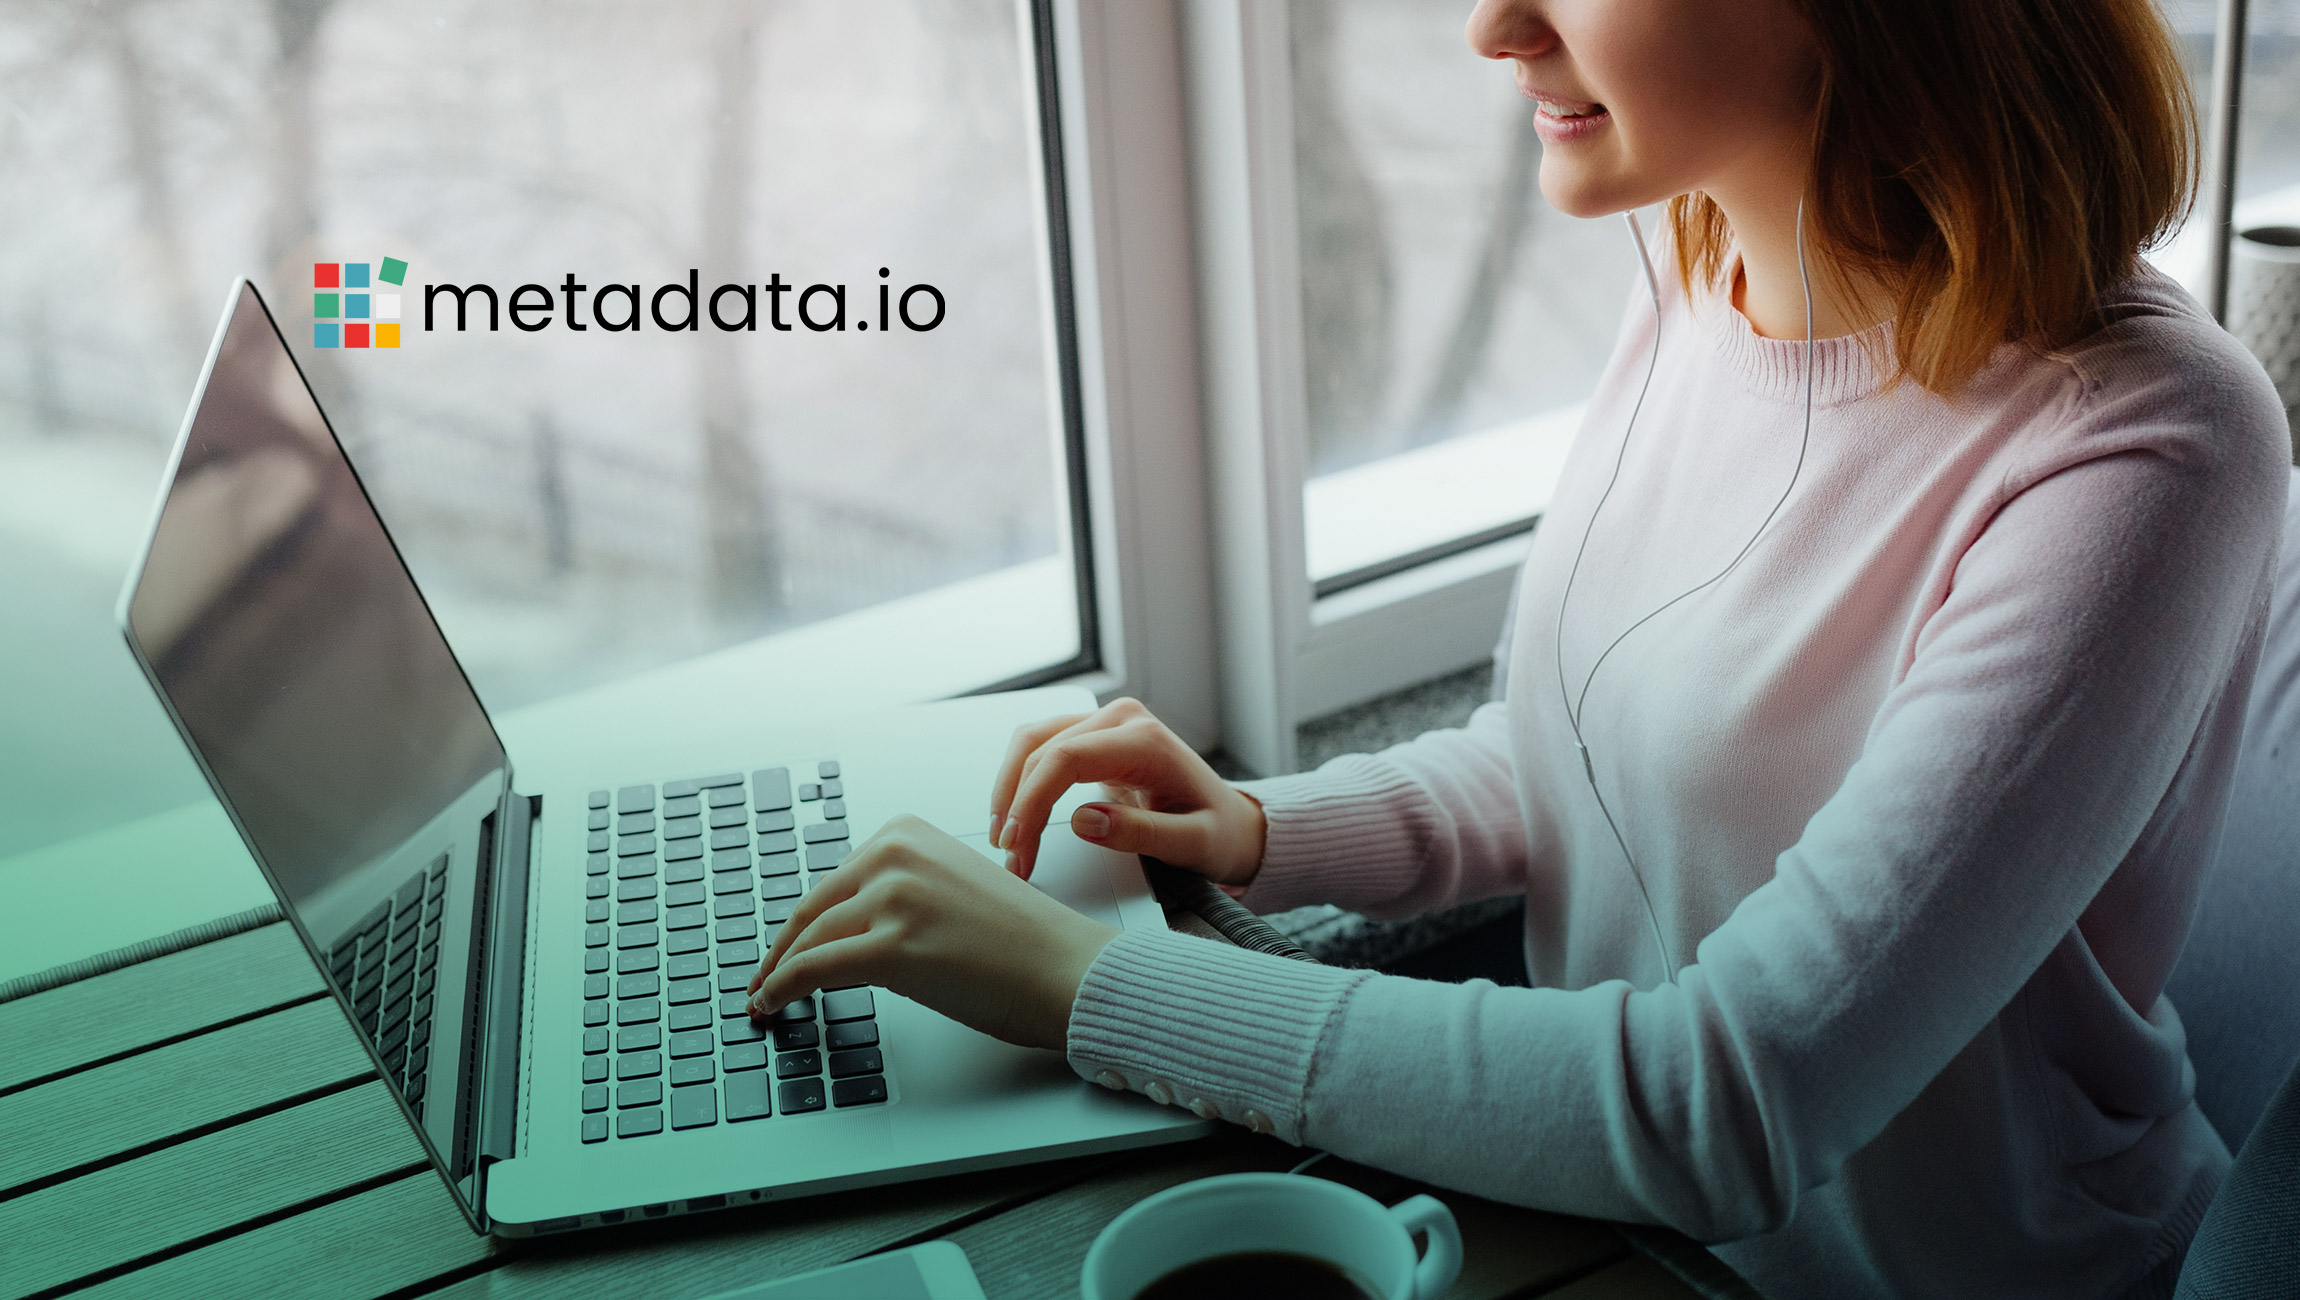 Metadata.io Named Leader in G2 Account-Based Advertising Software for Summer 2020 Report